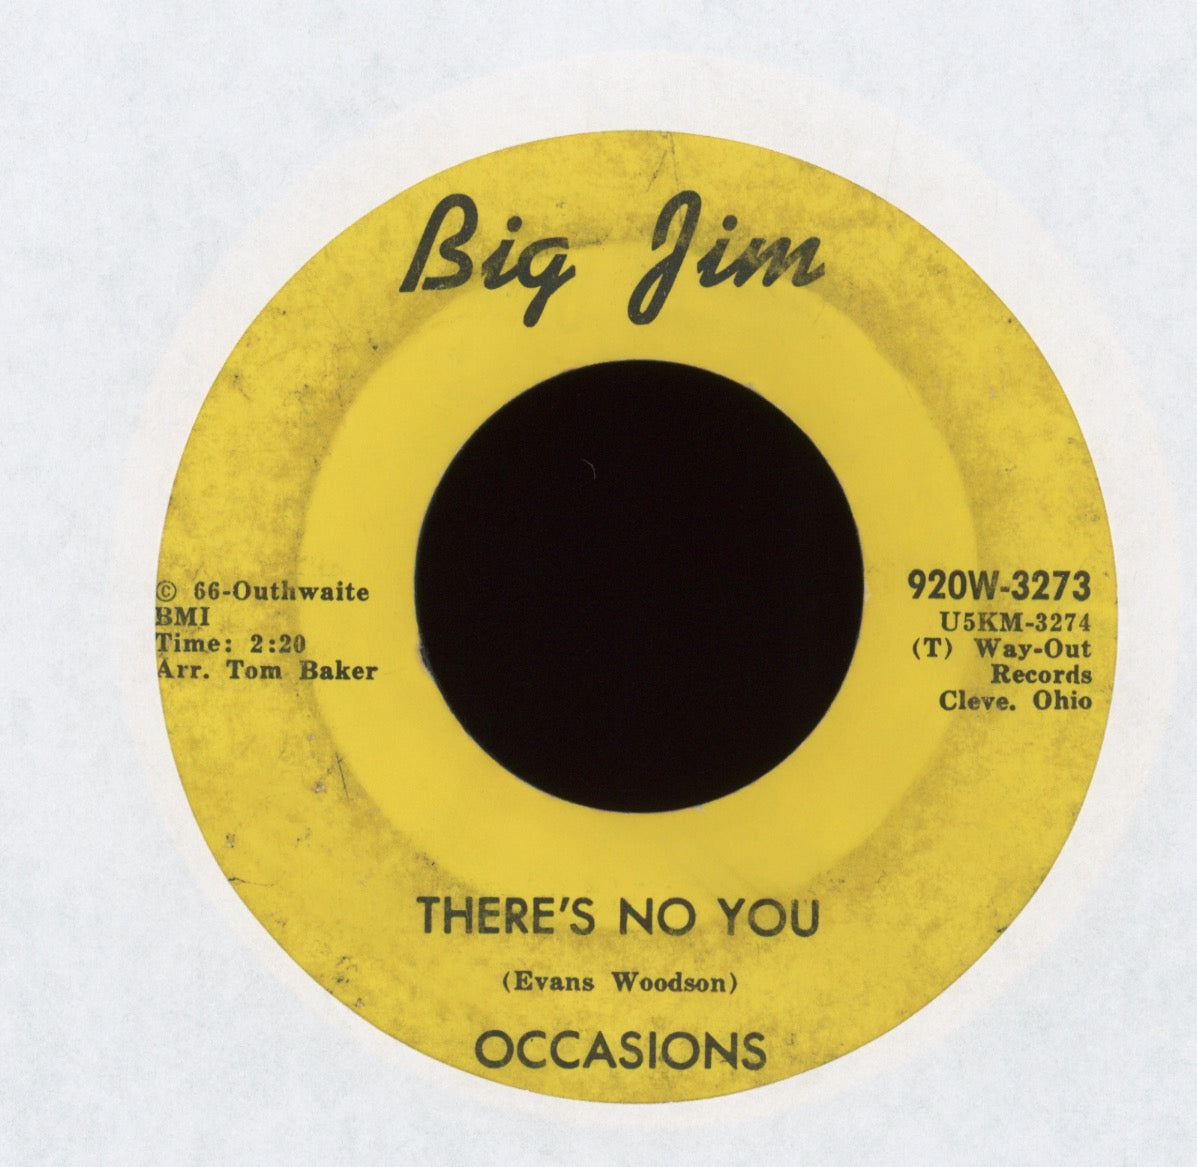 Occasions - Baby Don't Go on Big Jim Sweet Soul 45